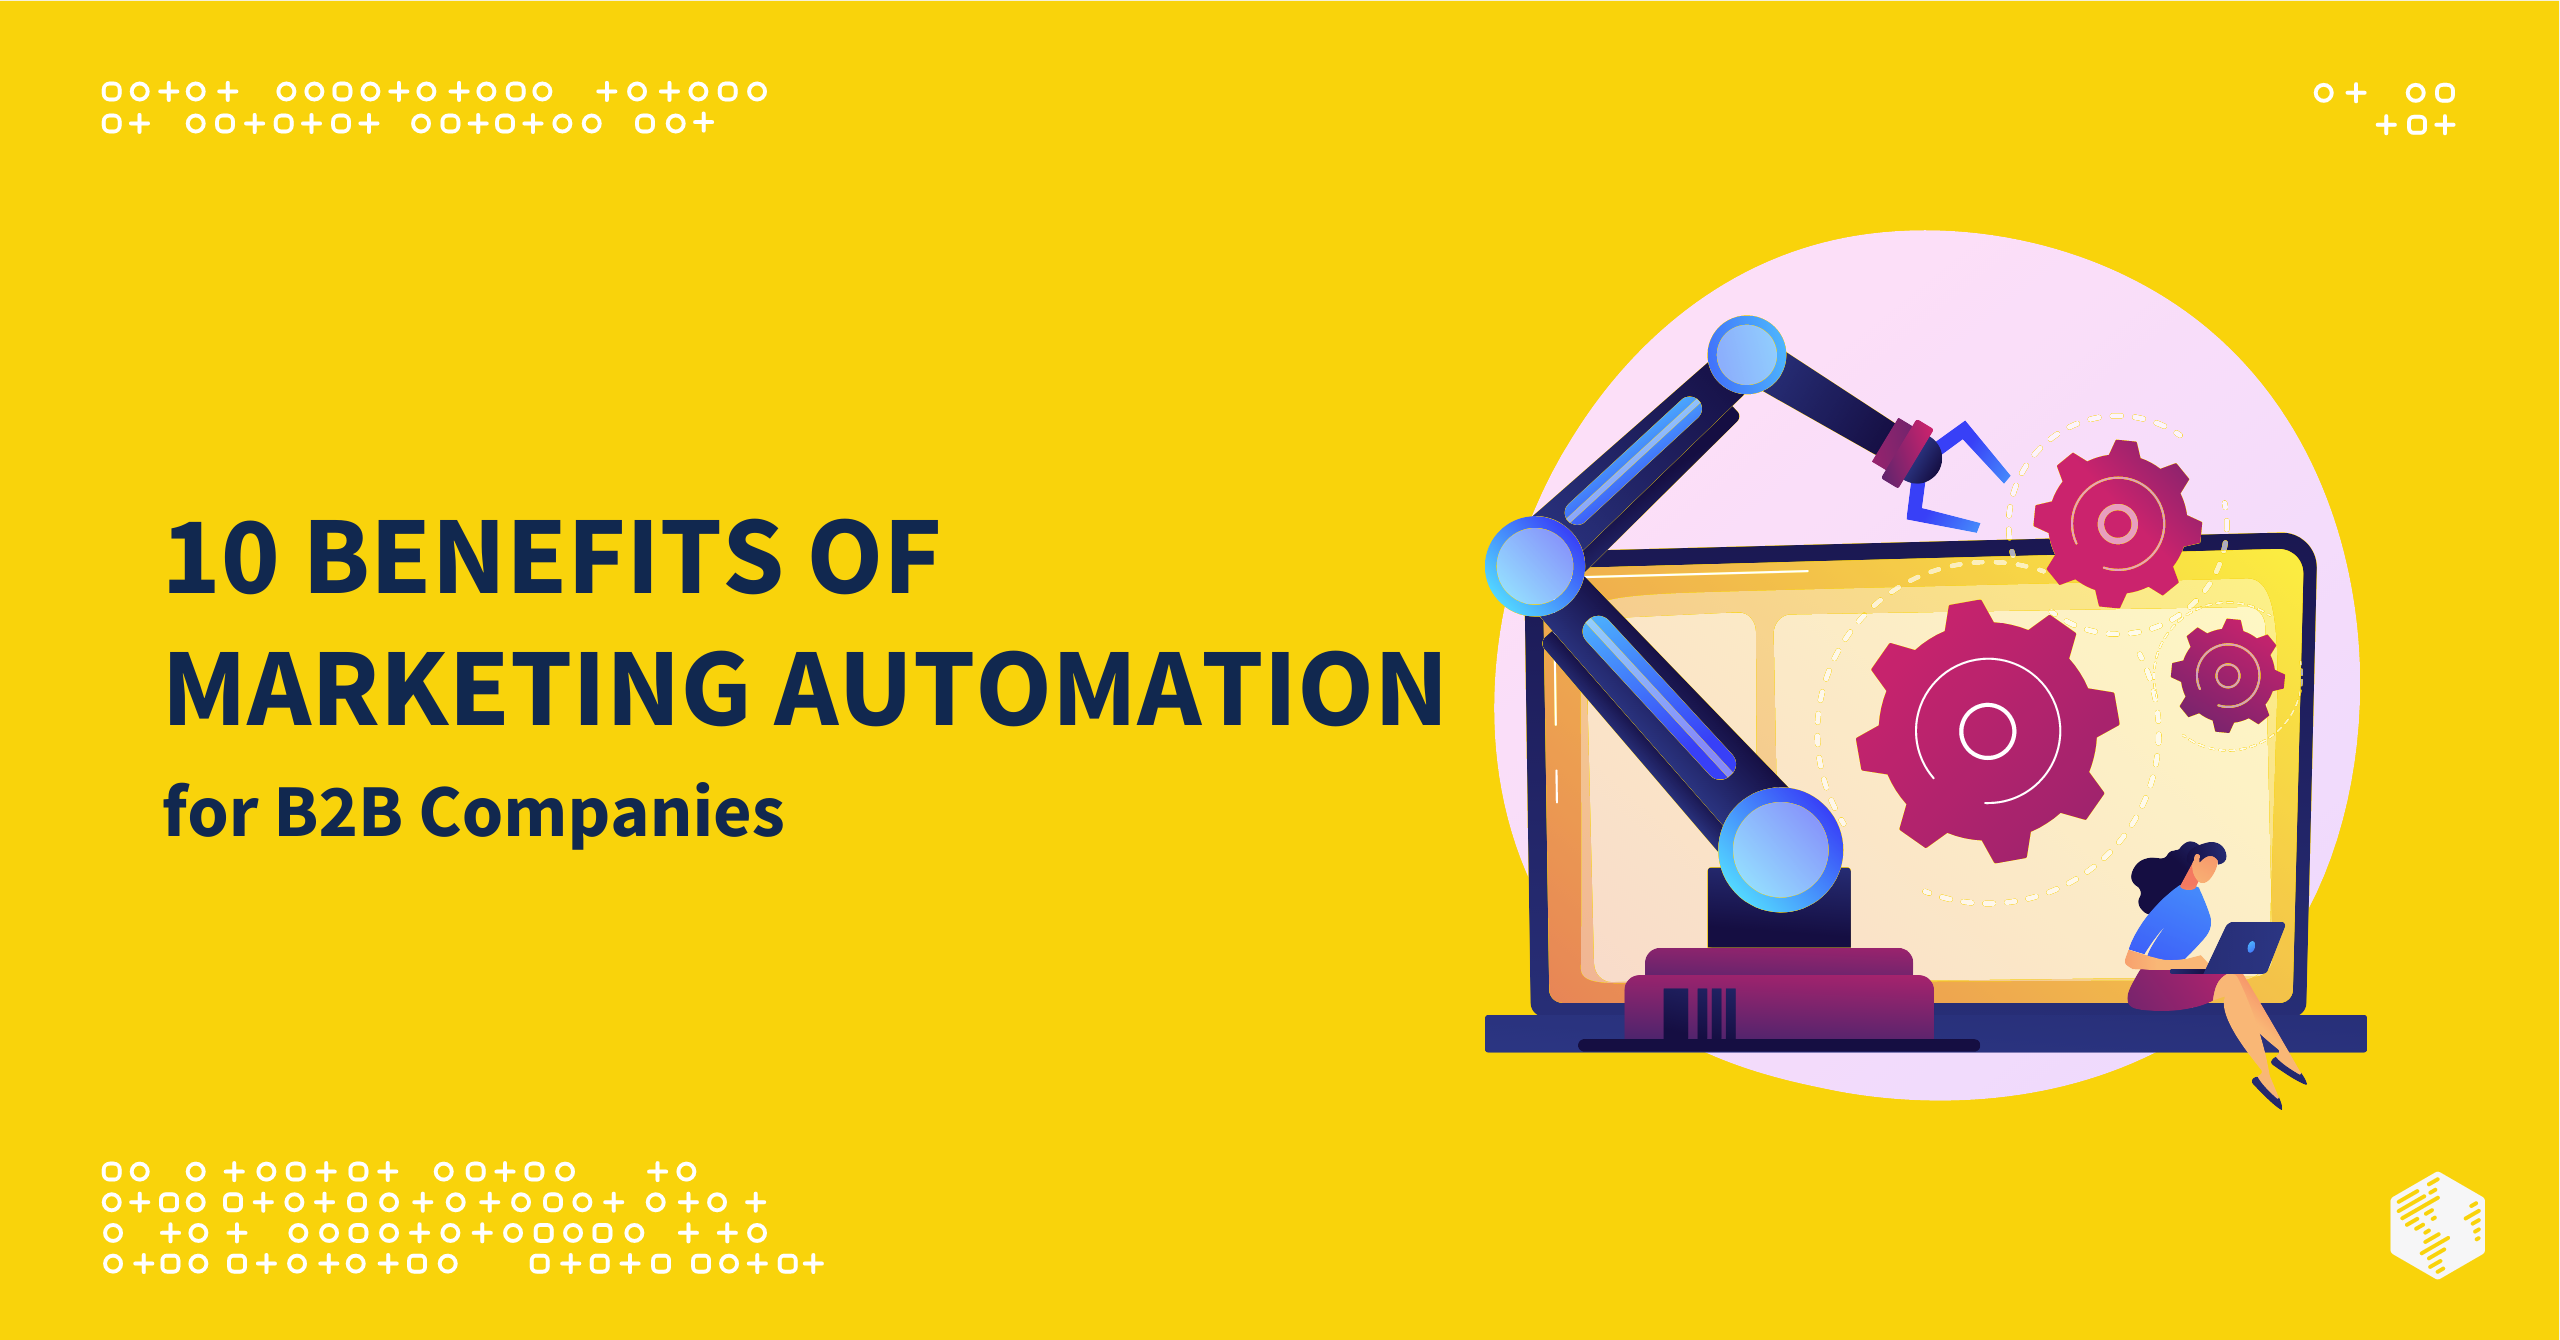 10 Benefits of Marketing Automation for B2B Companies